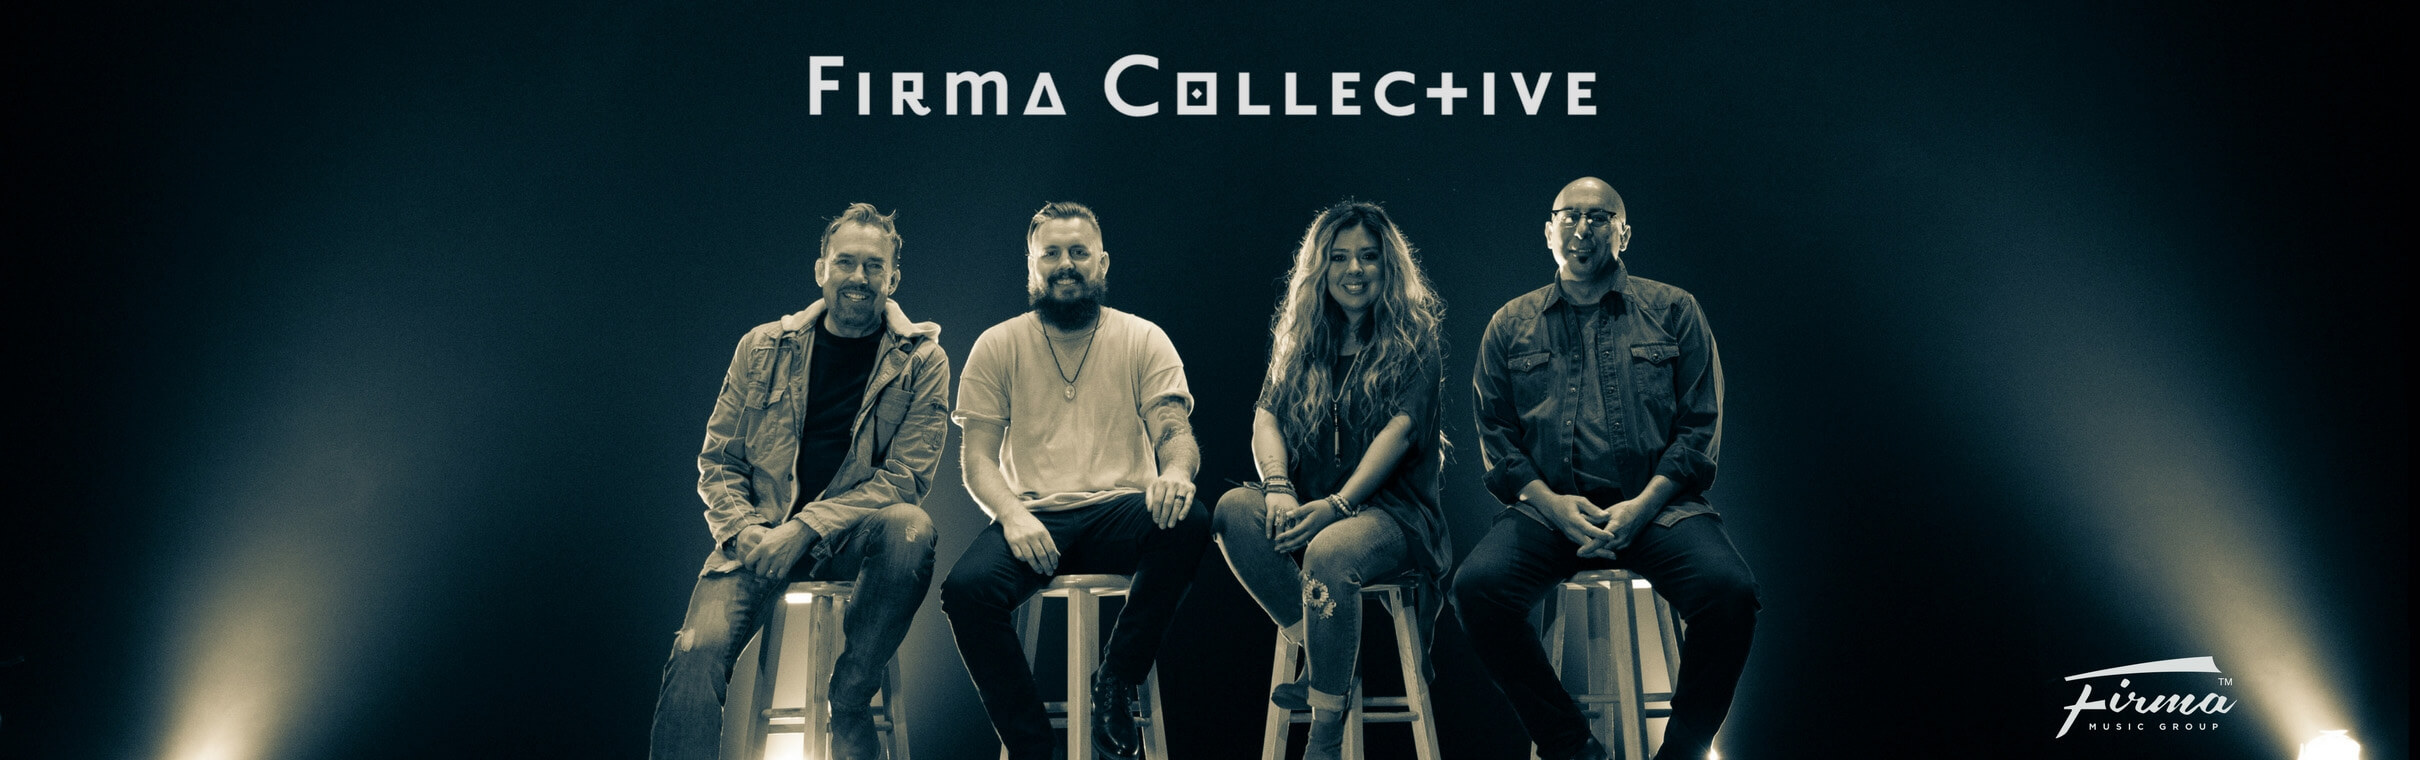 Firma Collective